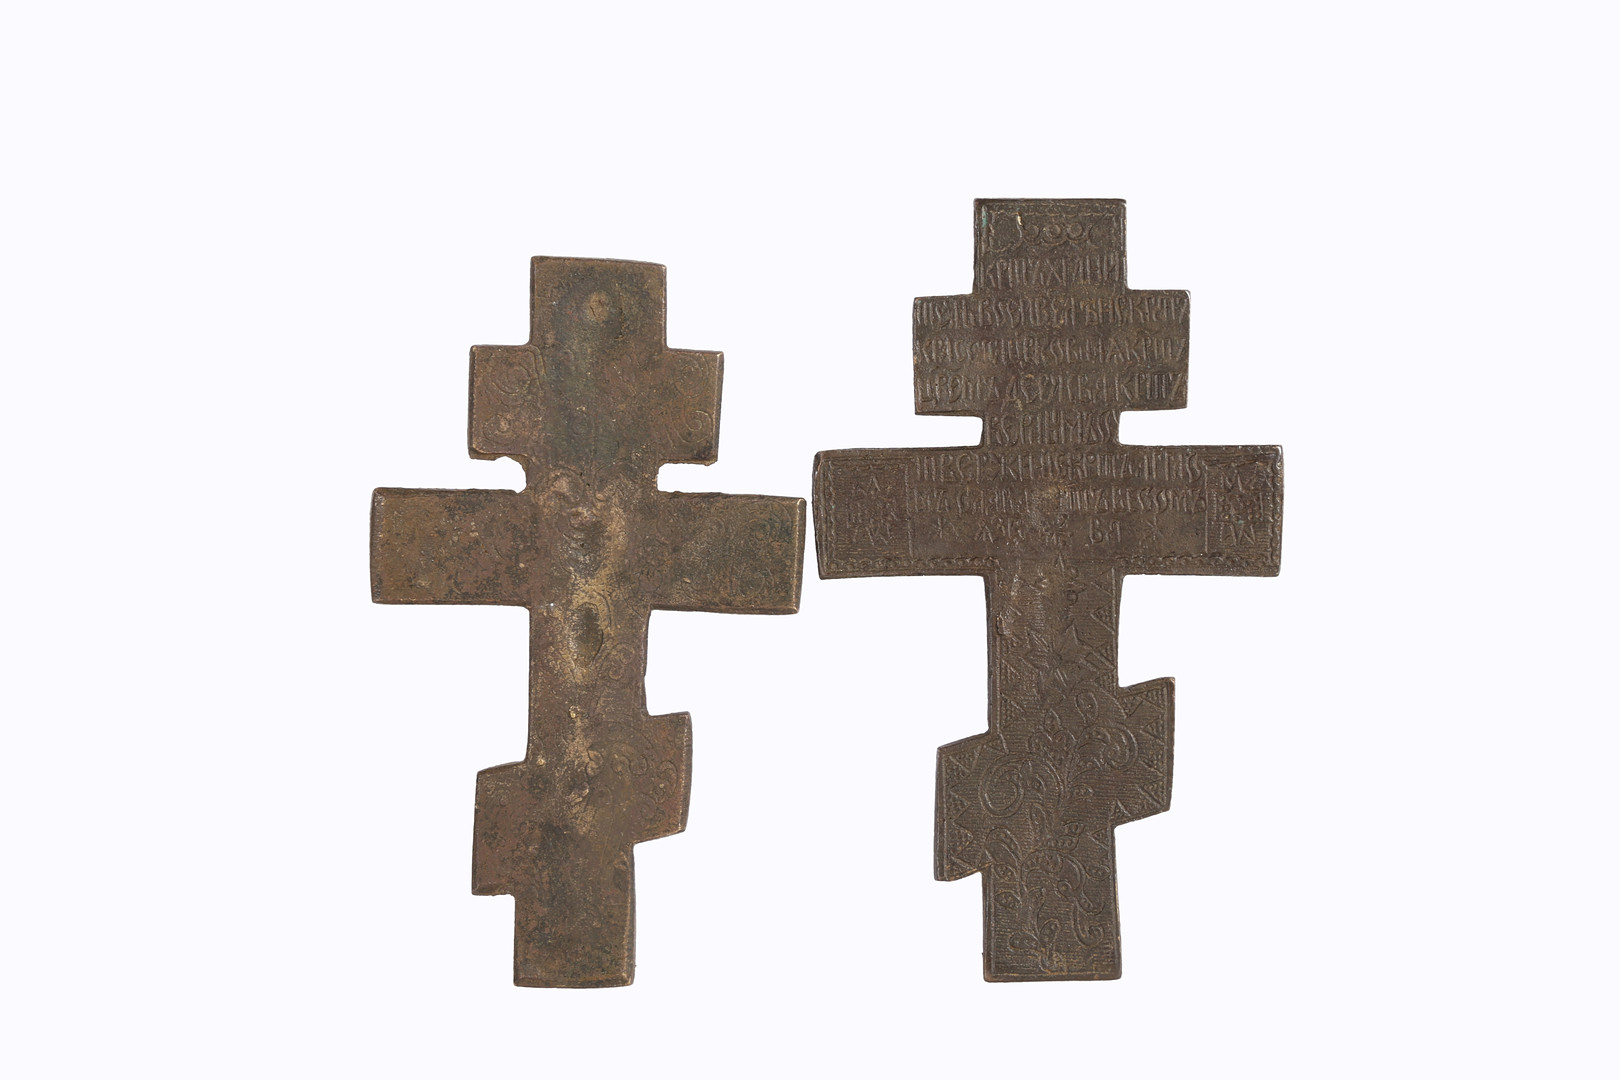 TWO 19TH CENTURY RUSSIAN ORTHODOX BRONZE ICONS. - Image 10 of 10